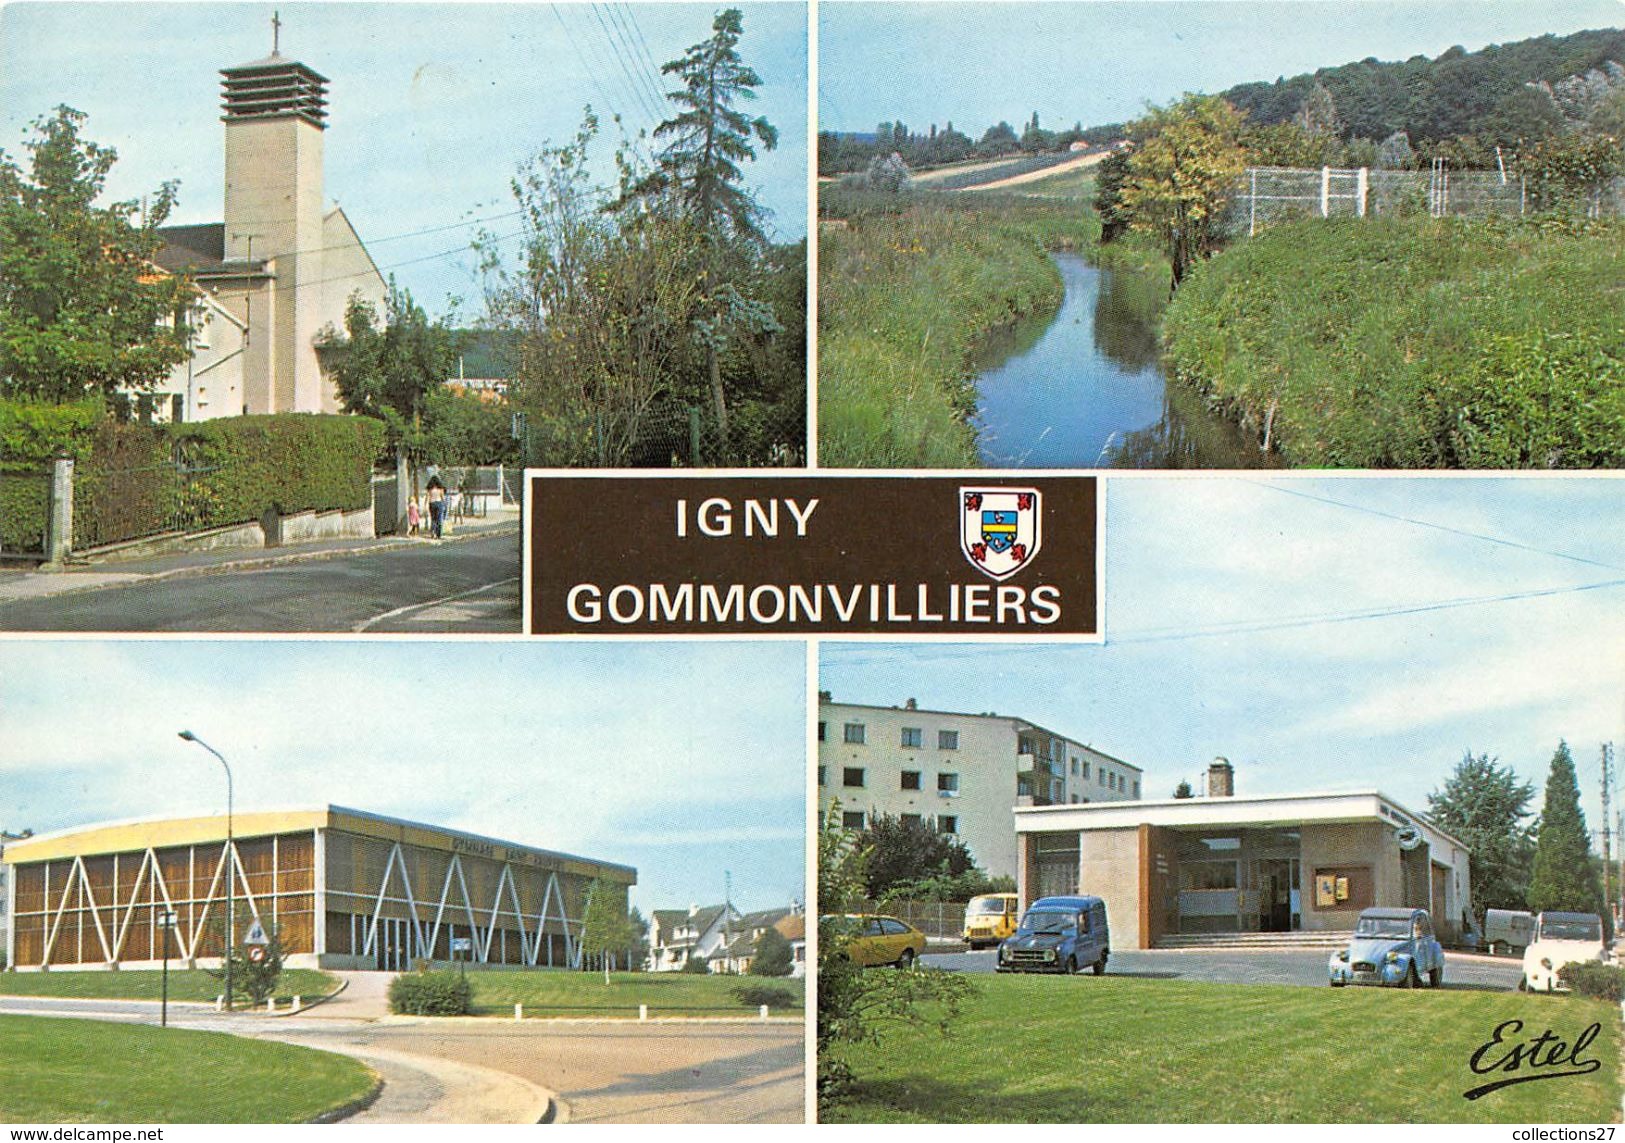 91-IGNY-GOMMONVILLIERS- MULTIVUES - Igny